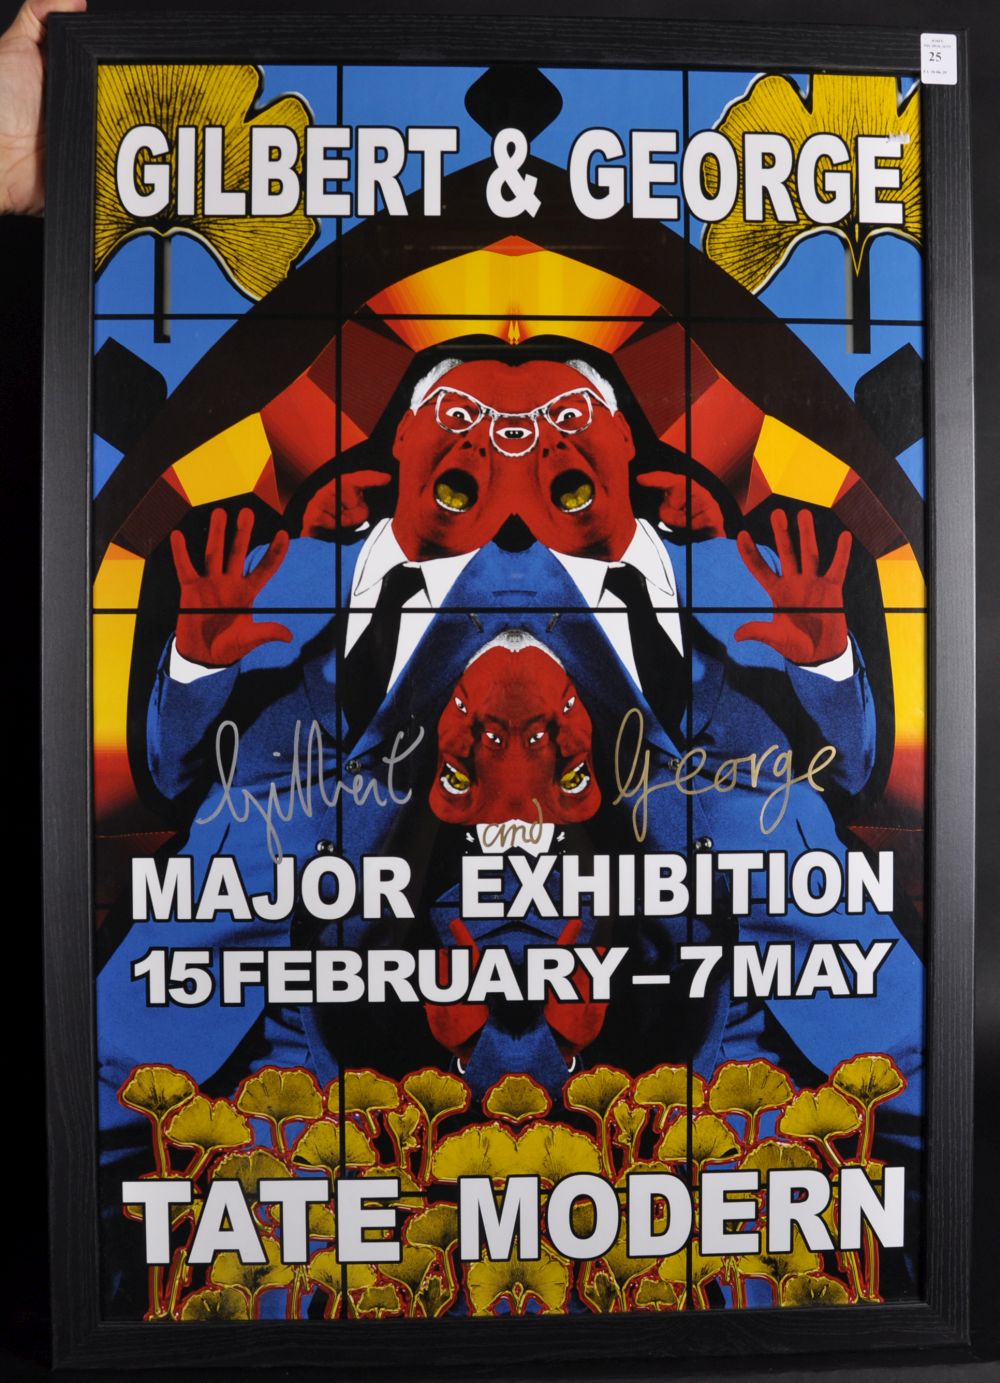 Gilbert and George (20th - 21st Century) British. "Major Exhibition Tate Modern", Poster, Signed - Image 2 of 3